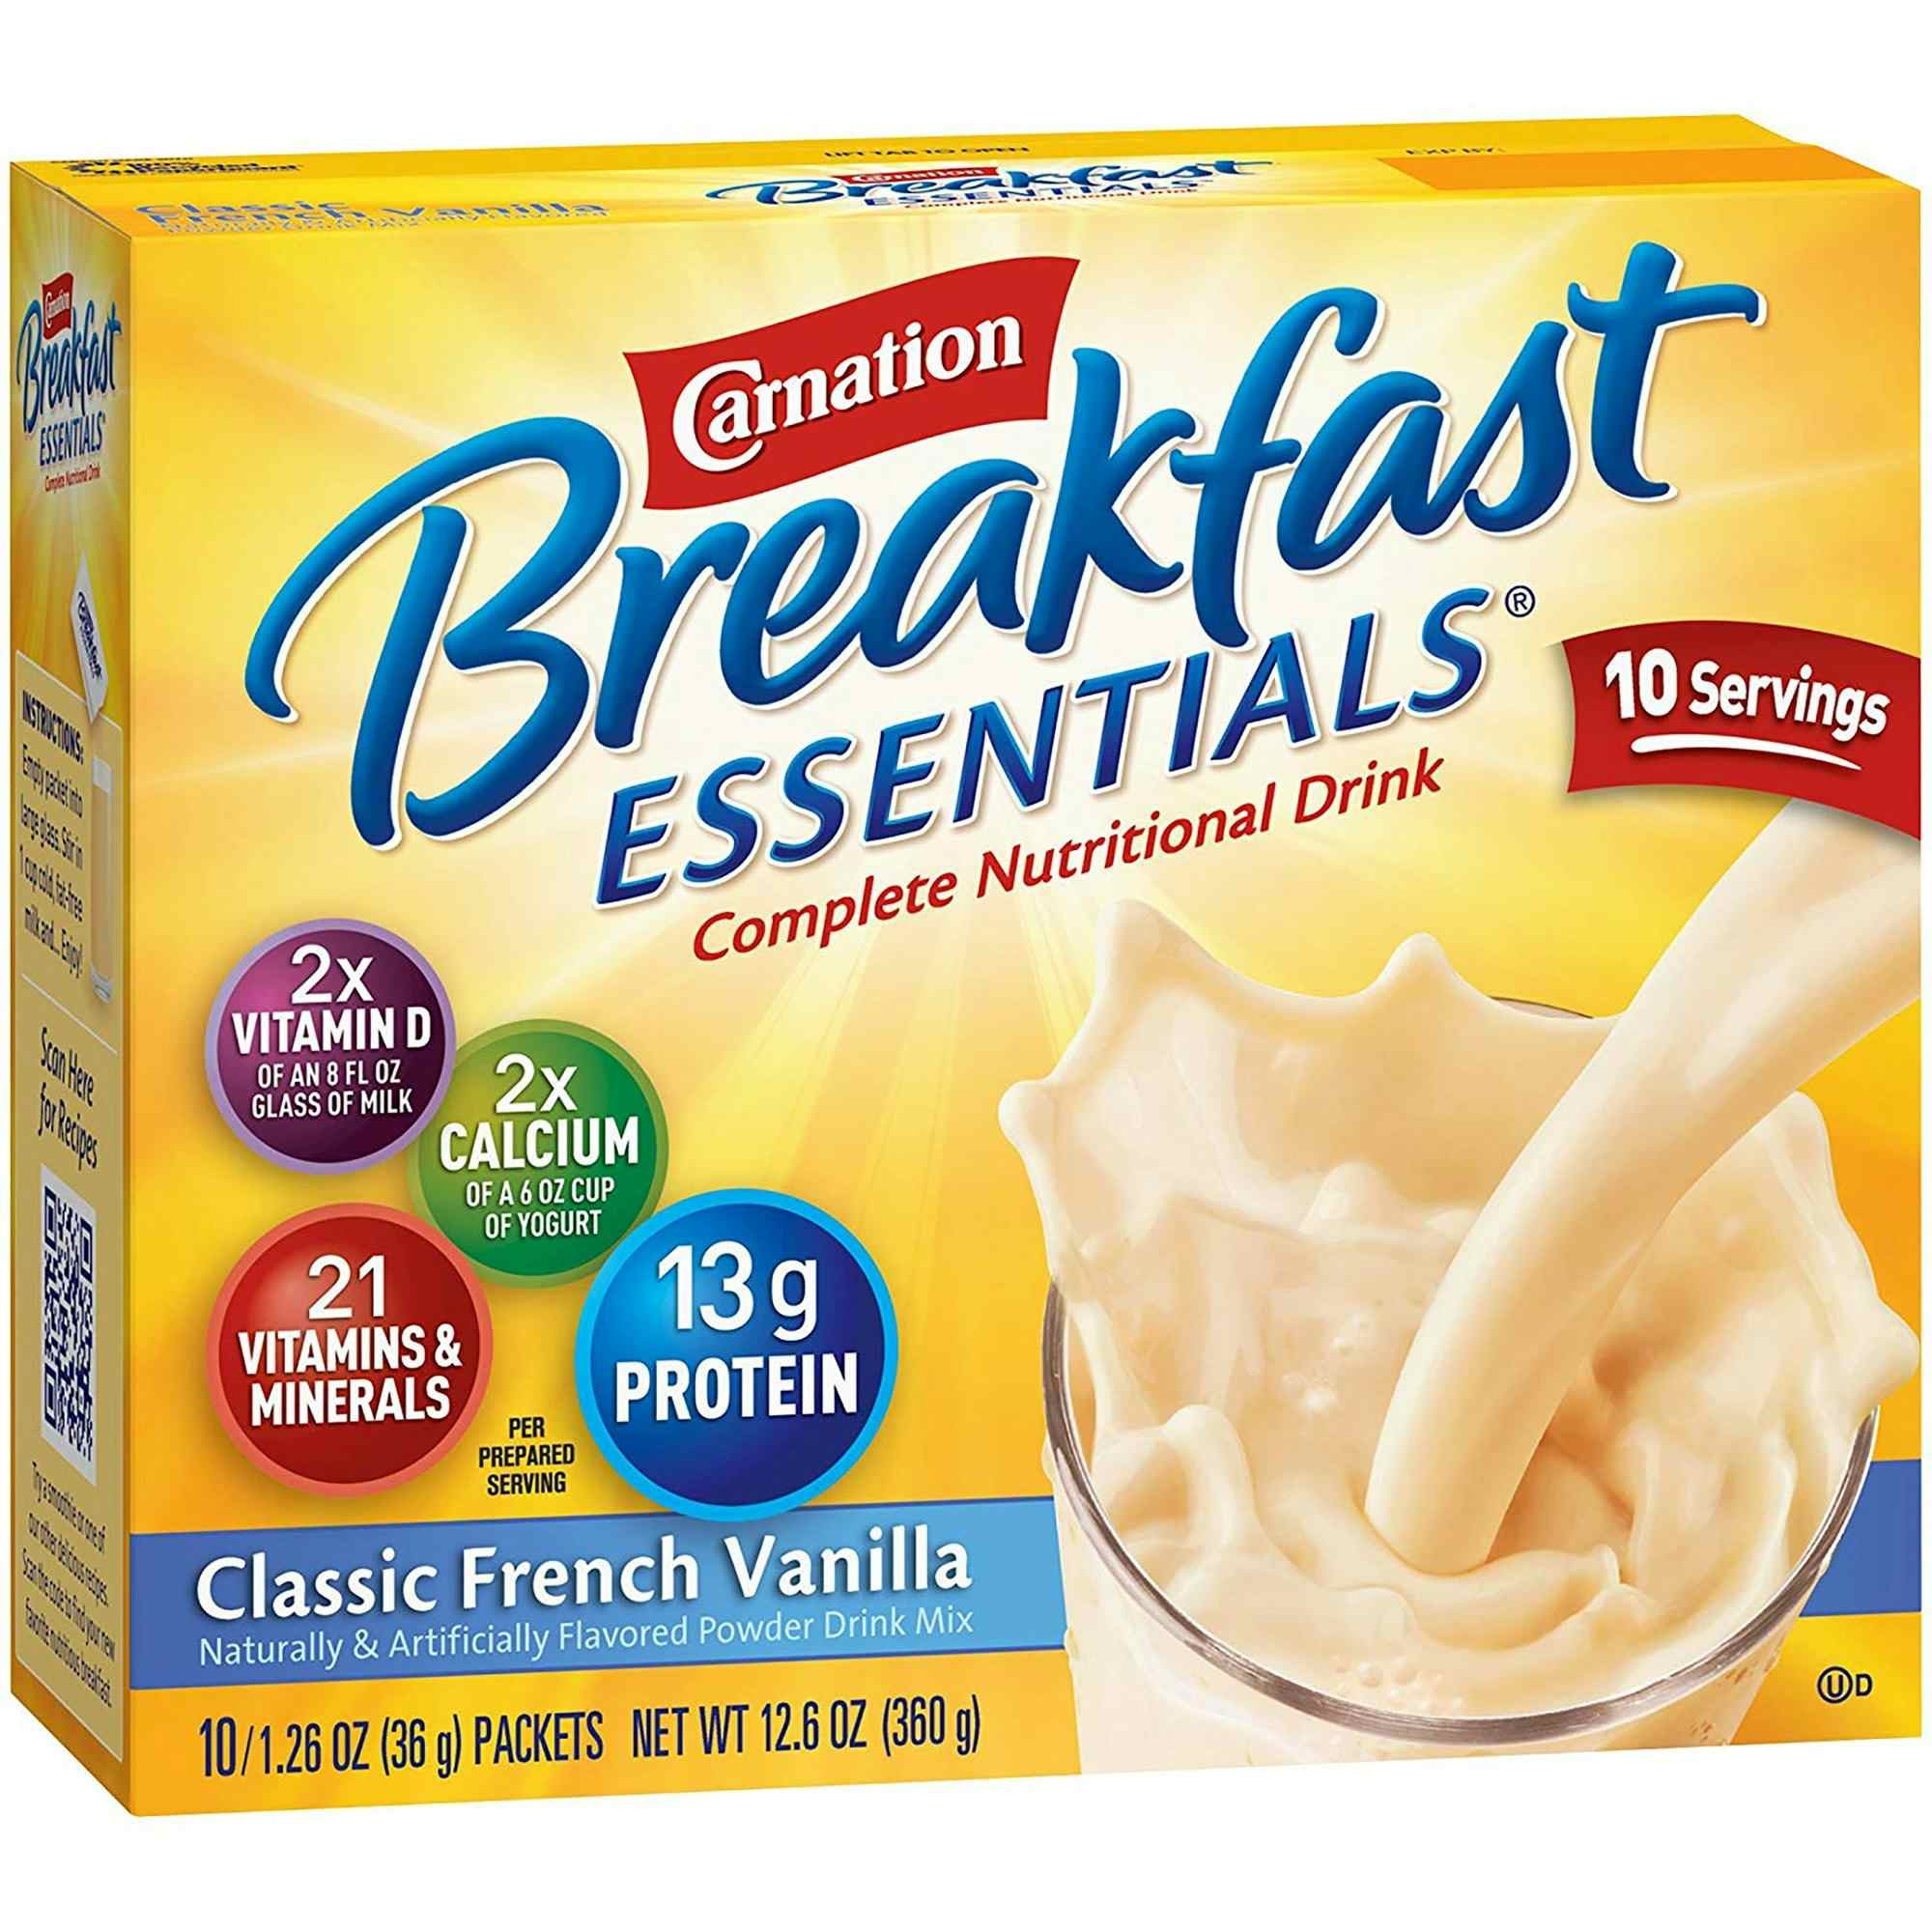 Carnation Breakfast Essentials Complete Nutritional Drink, Individual Packet, Classic French Vanilla, 36g, 11004659, Case of 60 (6 Boxes)